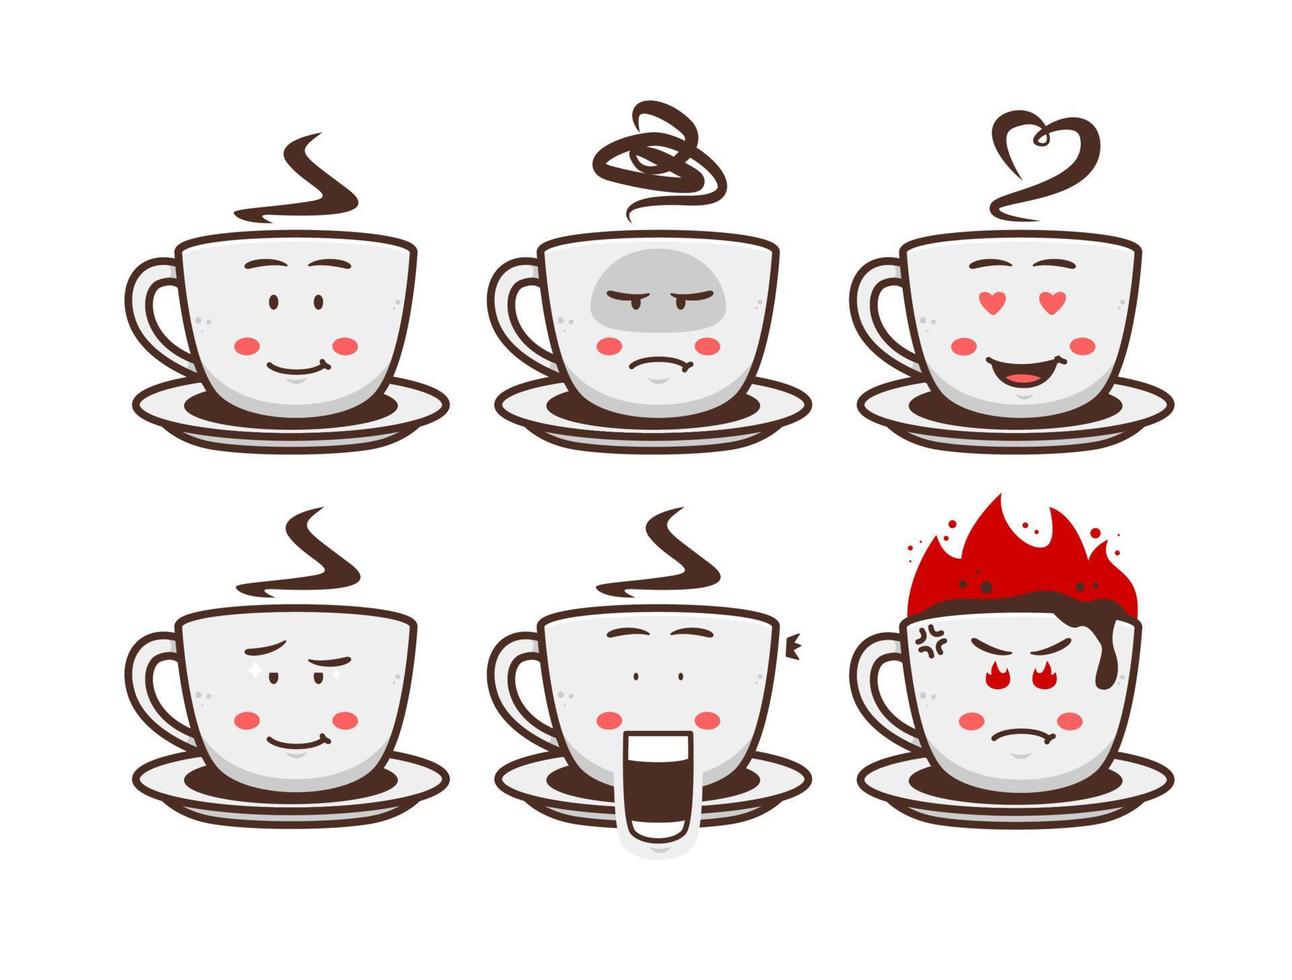 Coffee chocolate hot drink mug cup cartoon character mascot illustration set emoji with face expression vector